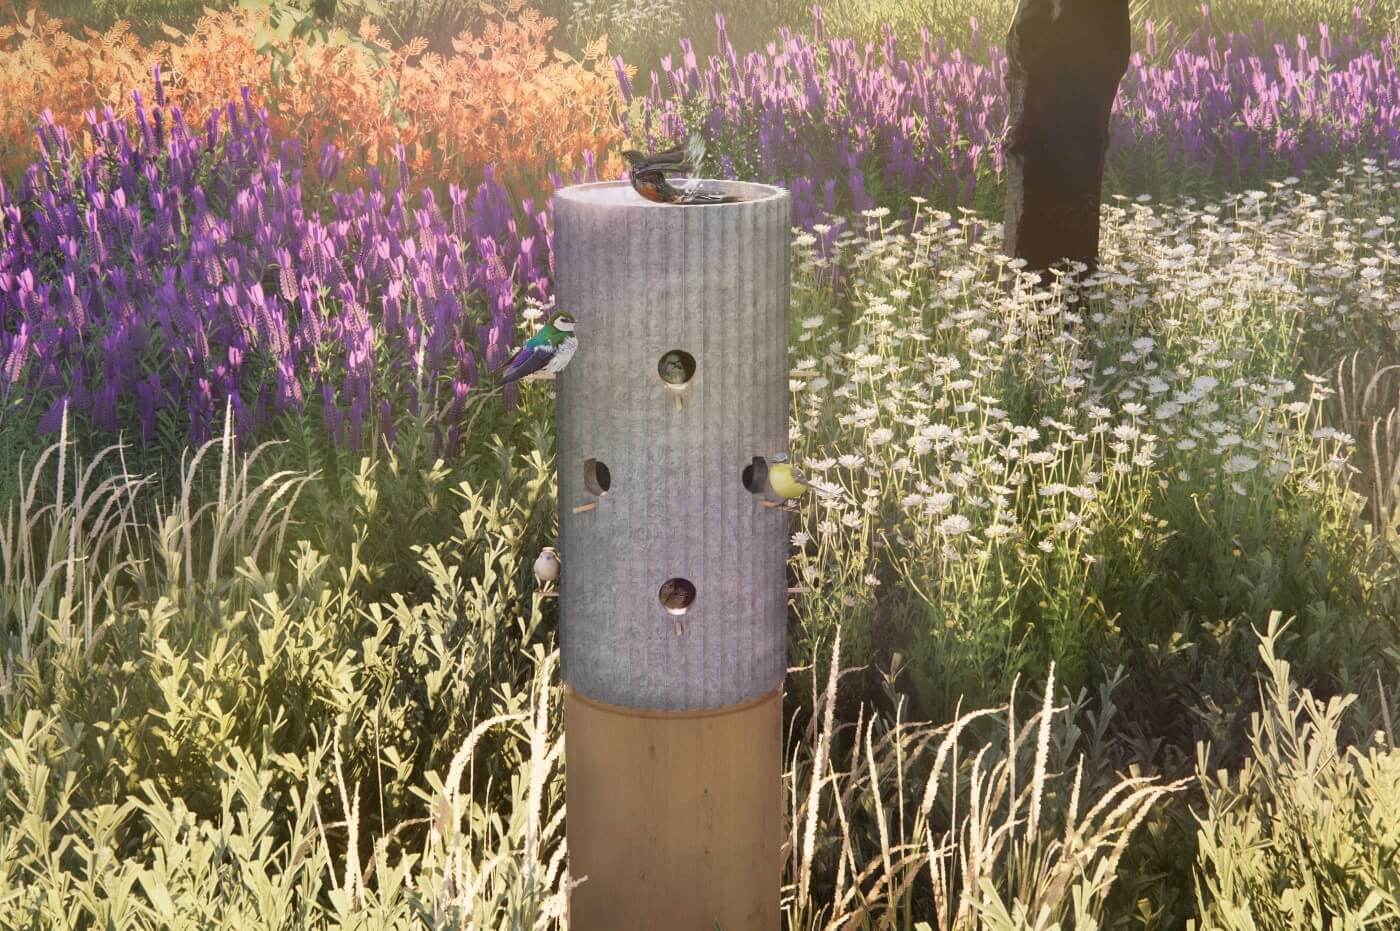 rendering of a cylindrical birdhouse with wildflowers in the background